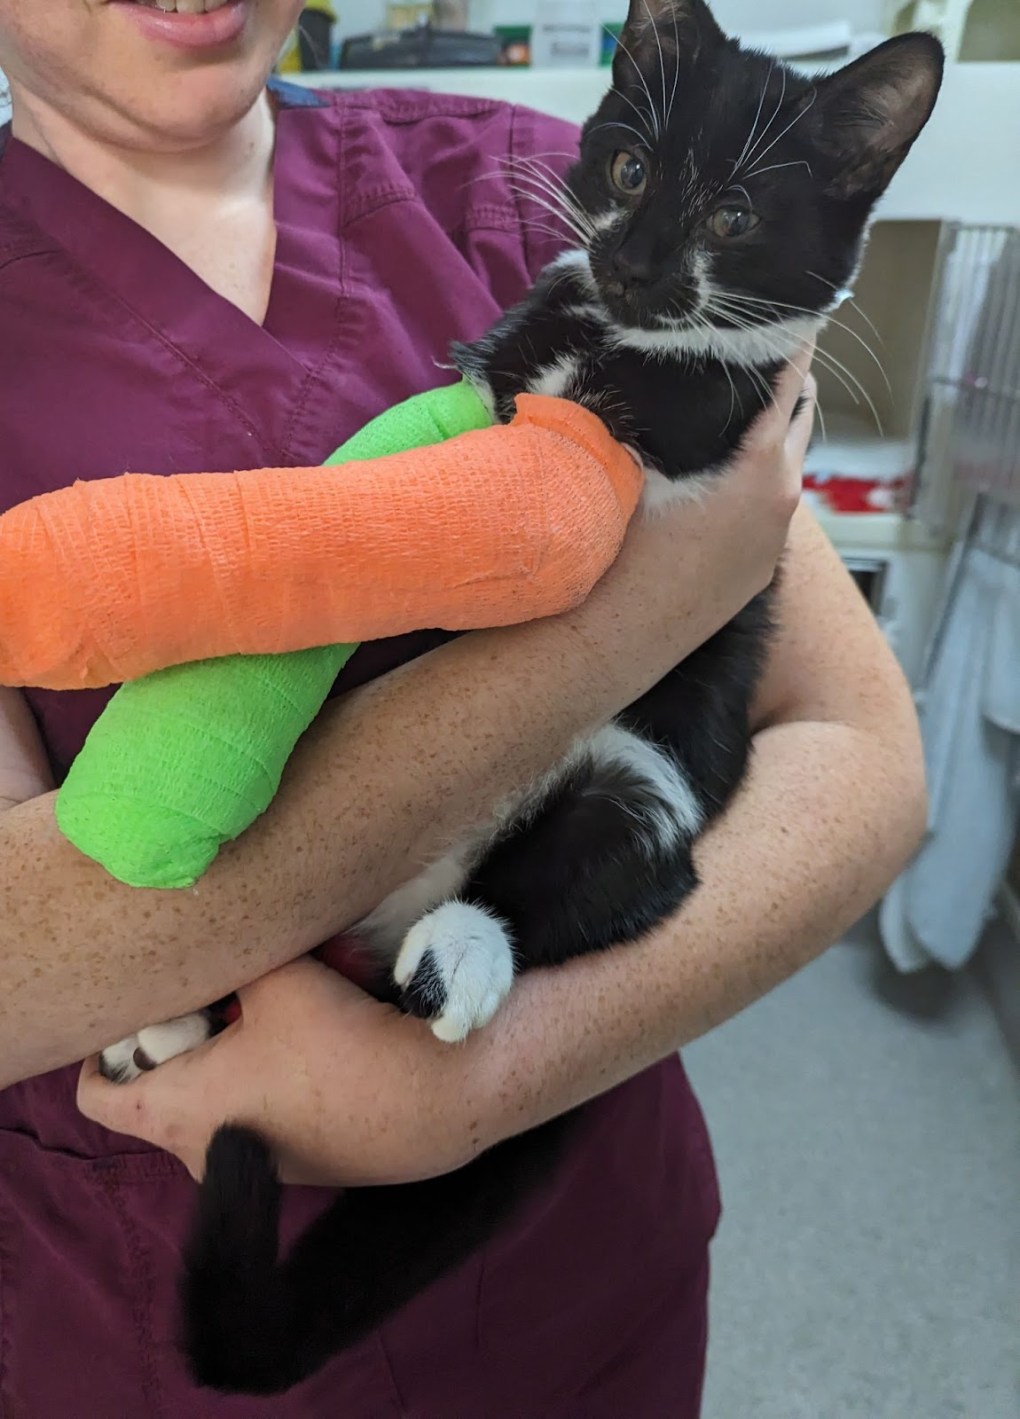 Cat Named Forest Recovering Well in RSPCA Care after Abandonment and Deliberate Injury